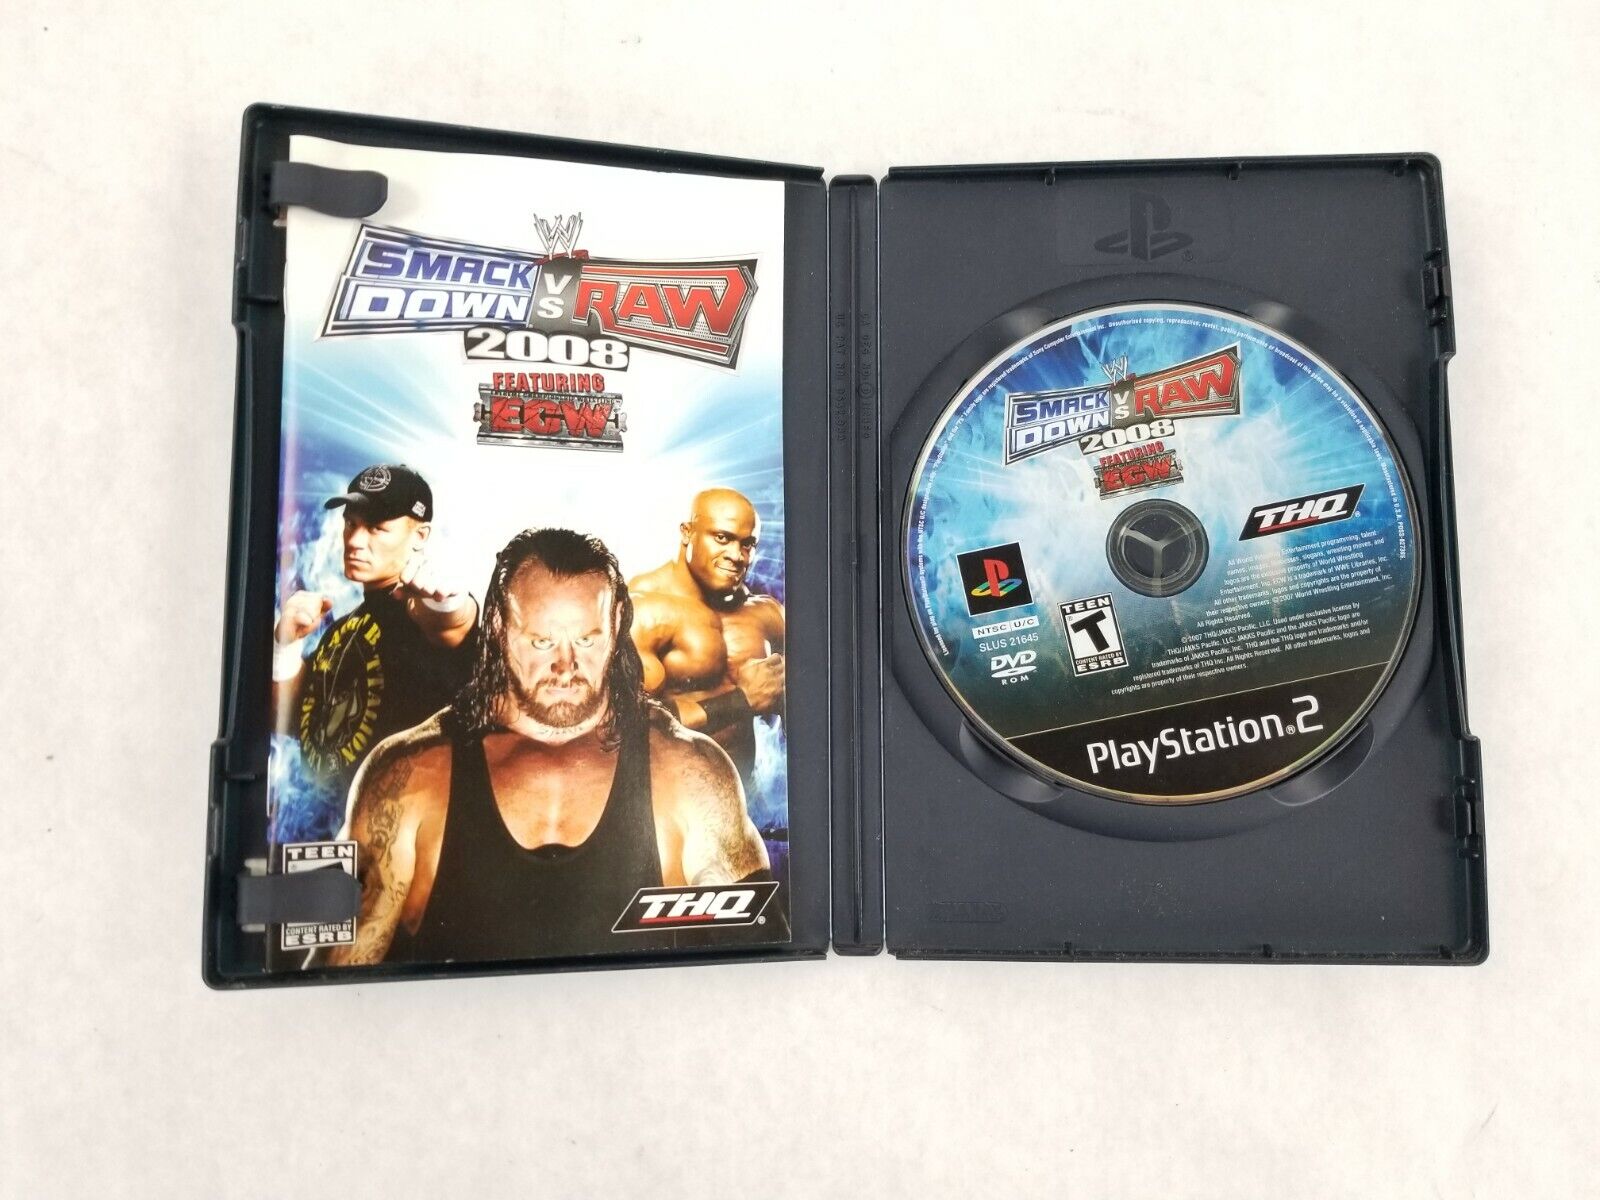 WWE Smackdown VS Raw 2008 With Manual.